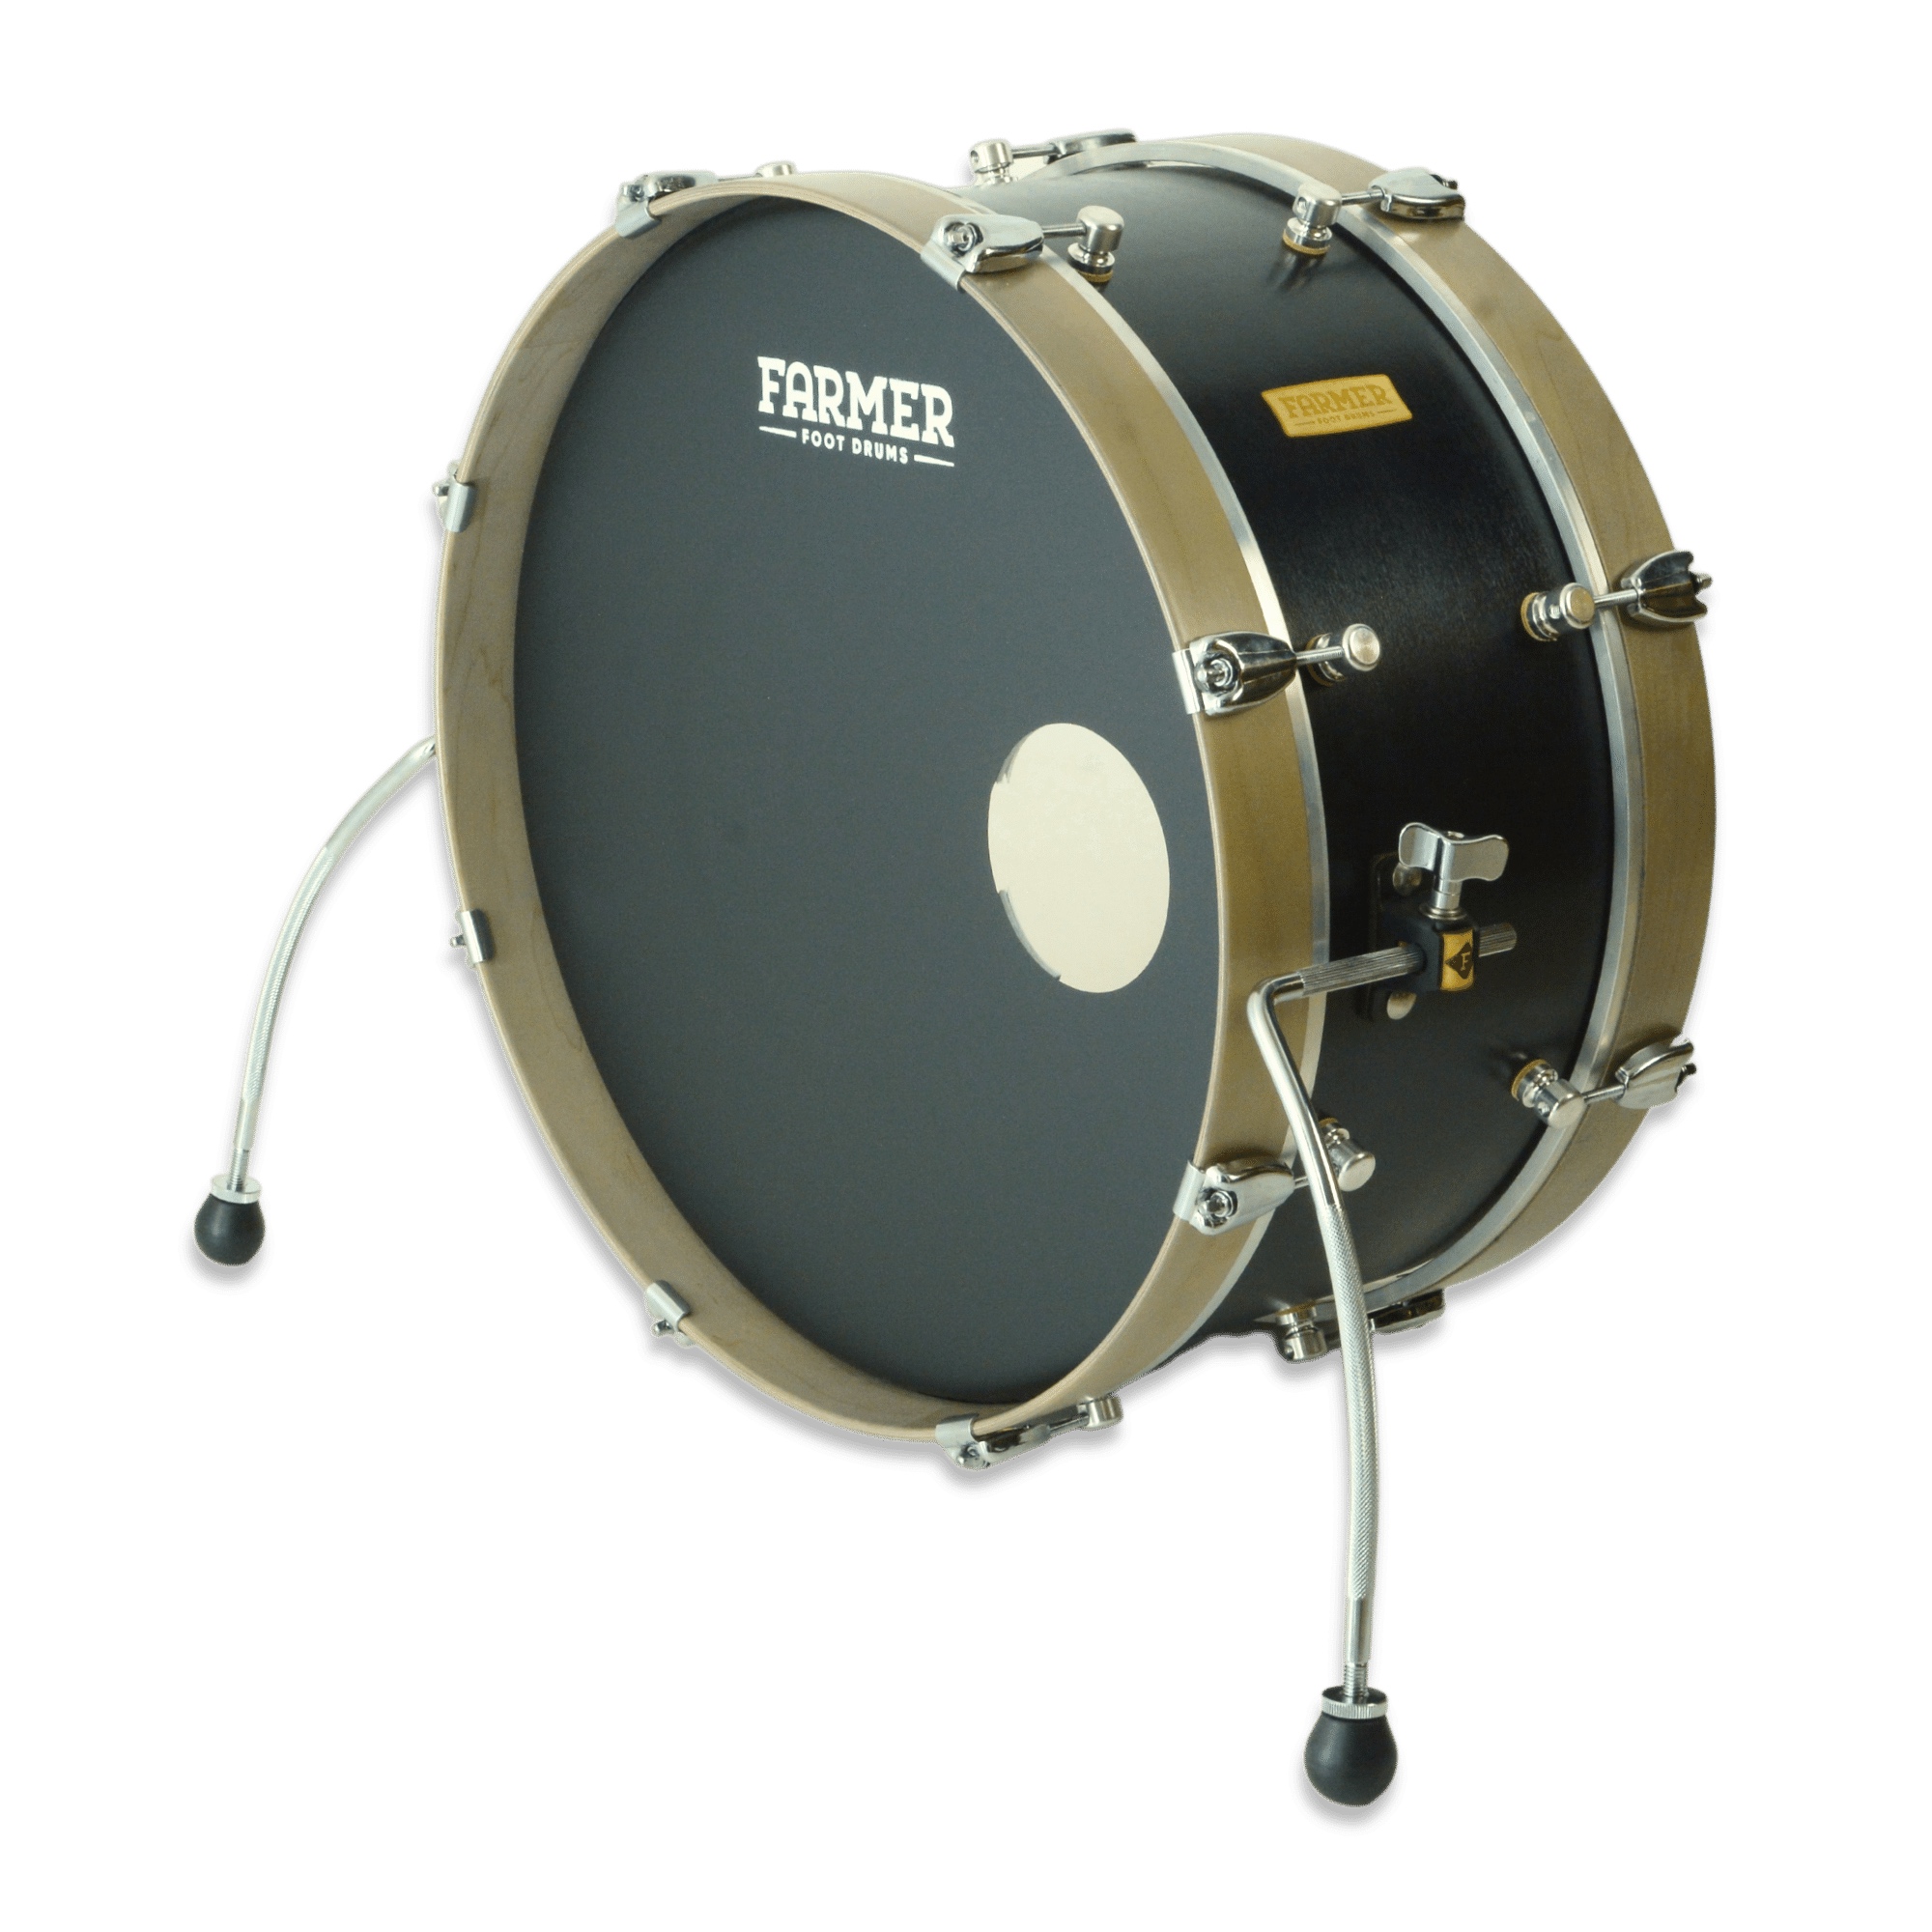 Farmer Double StompDrum - Small Bass Drum for Cocktail Drum Set